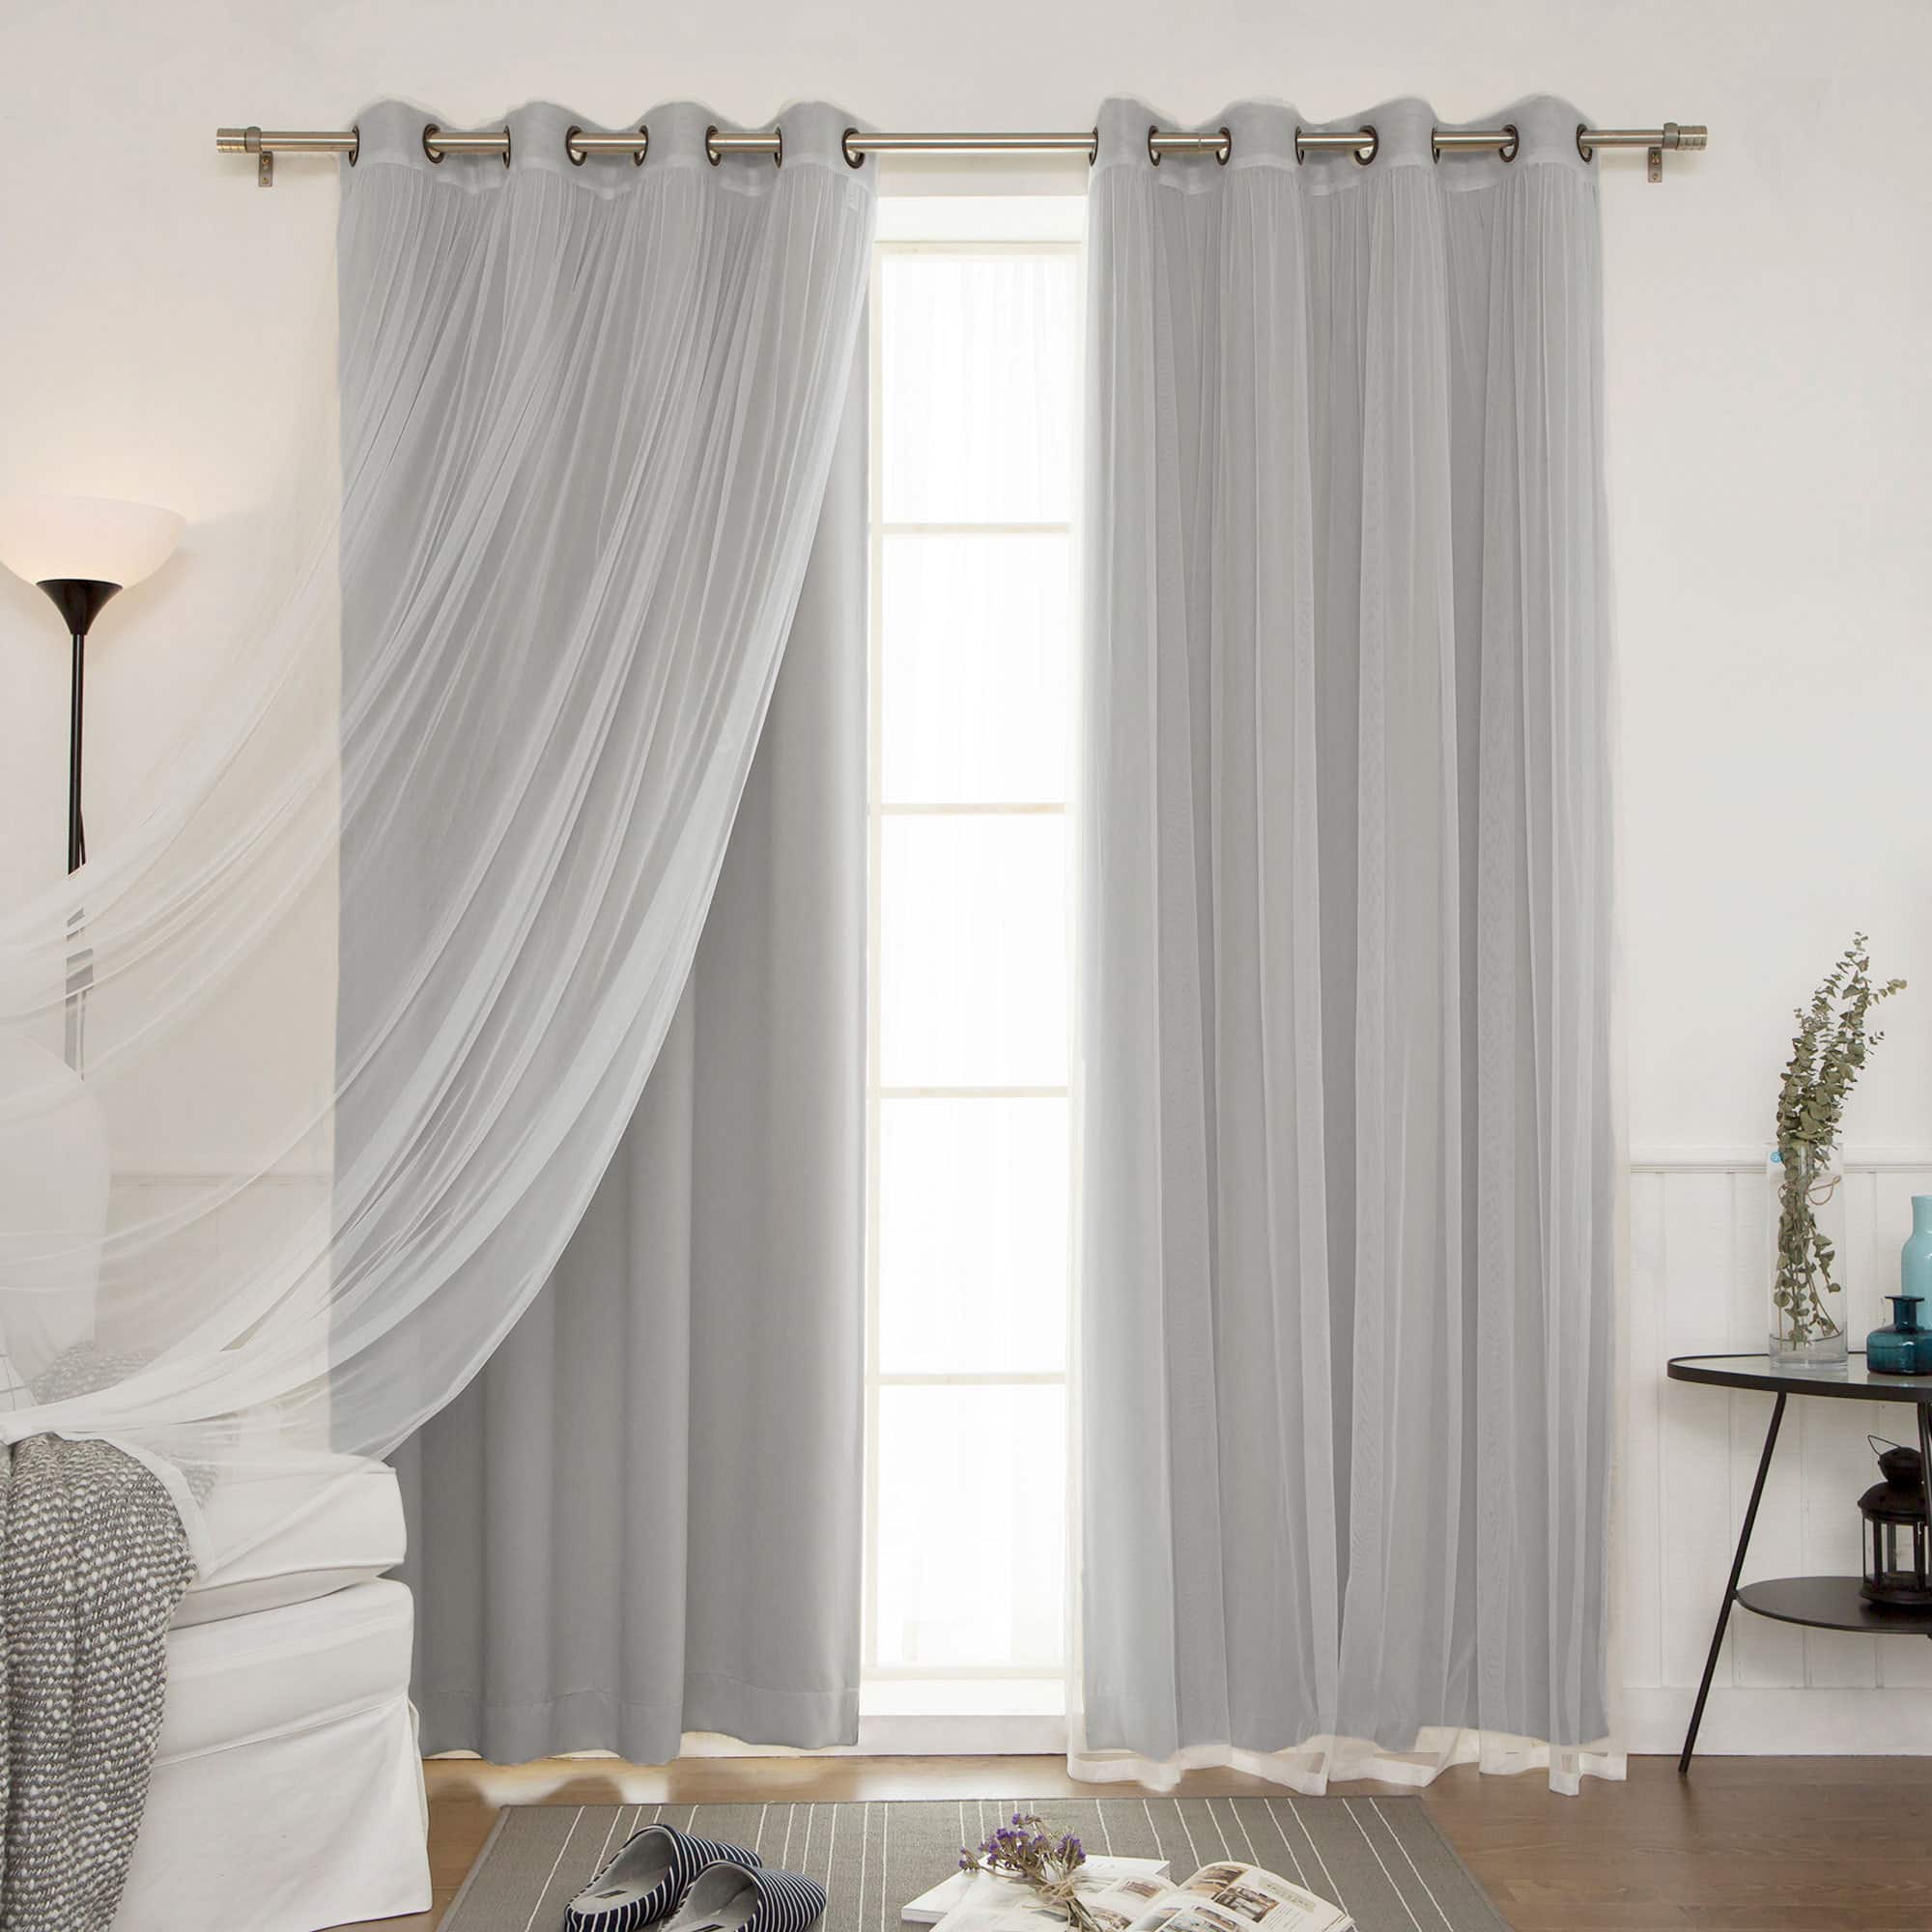 Aurora Home Mix and Match Curtains Blackout and Tulle Lace Sheer ...